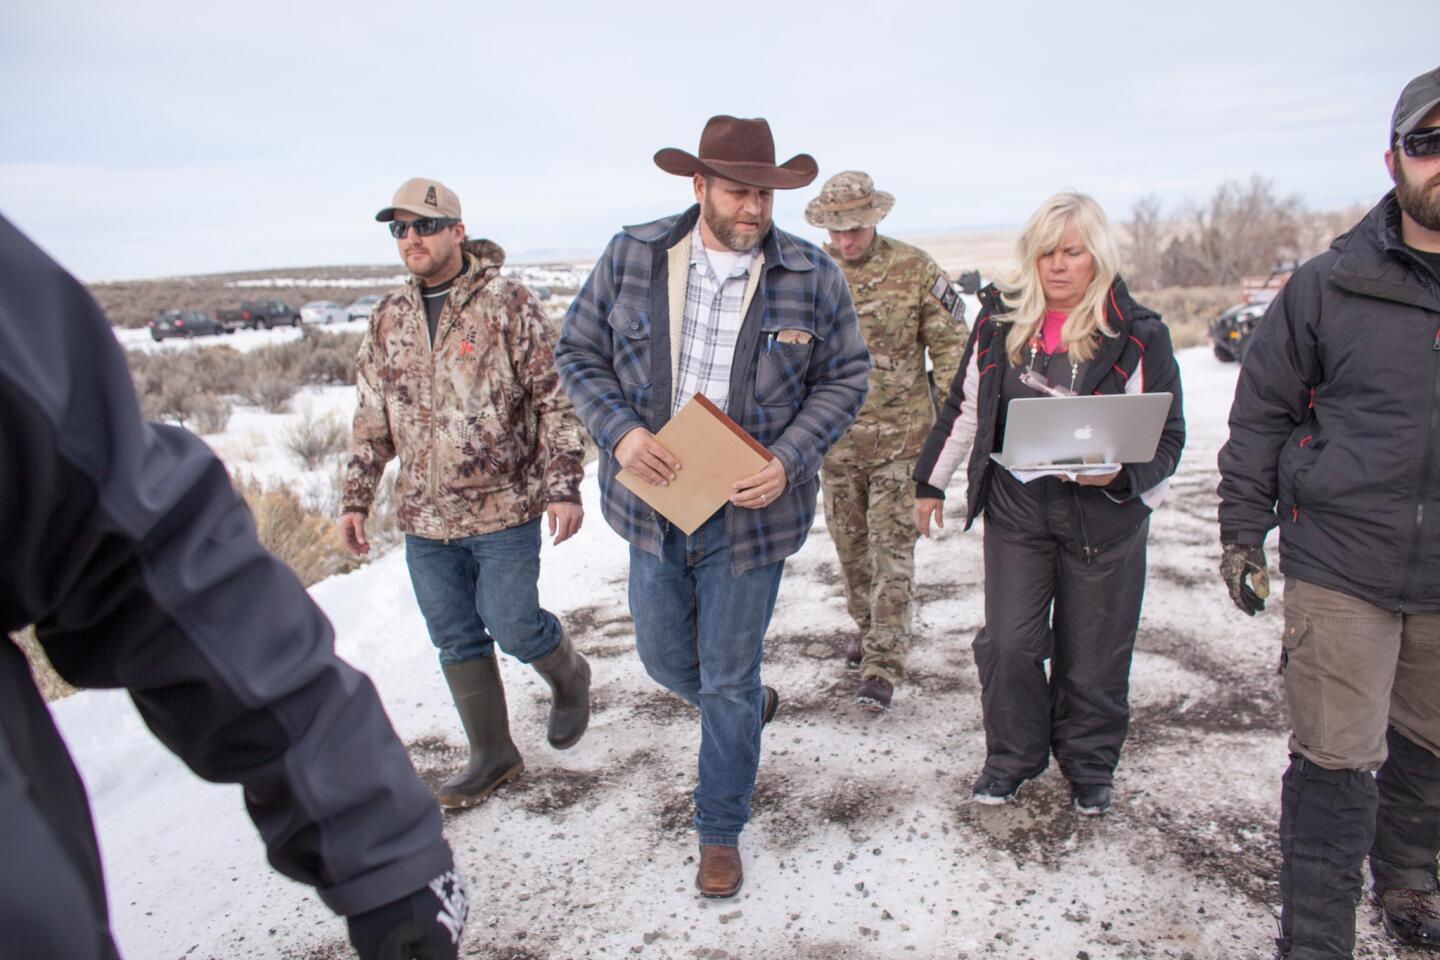 Ammon Bundy, leader of a group of armed anti-government protesters, arrives to speak to the media at the Malheur National Wildlife Refuge near Burns, Ore., on Monday.